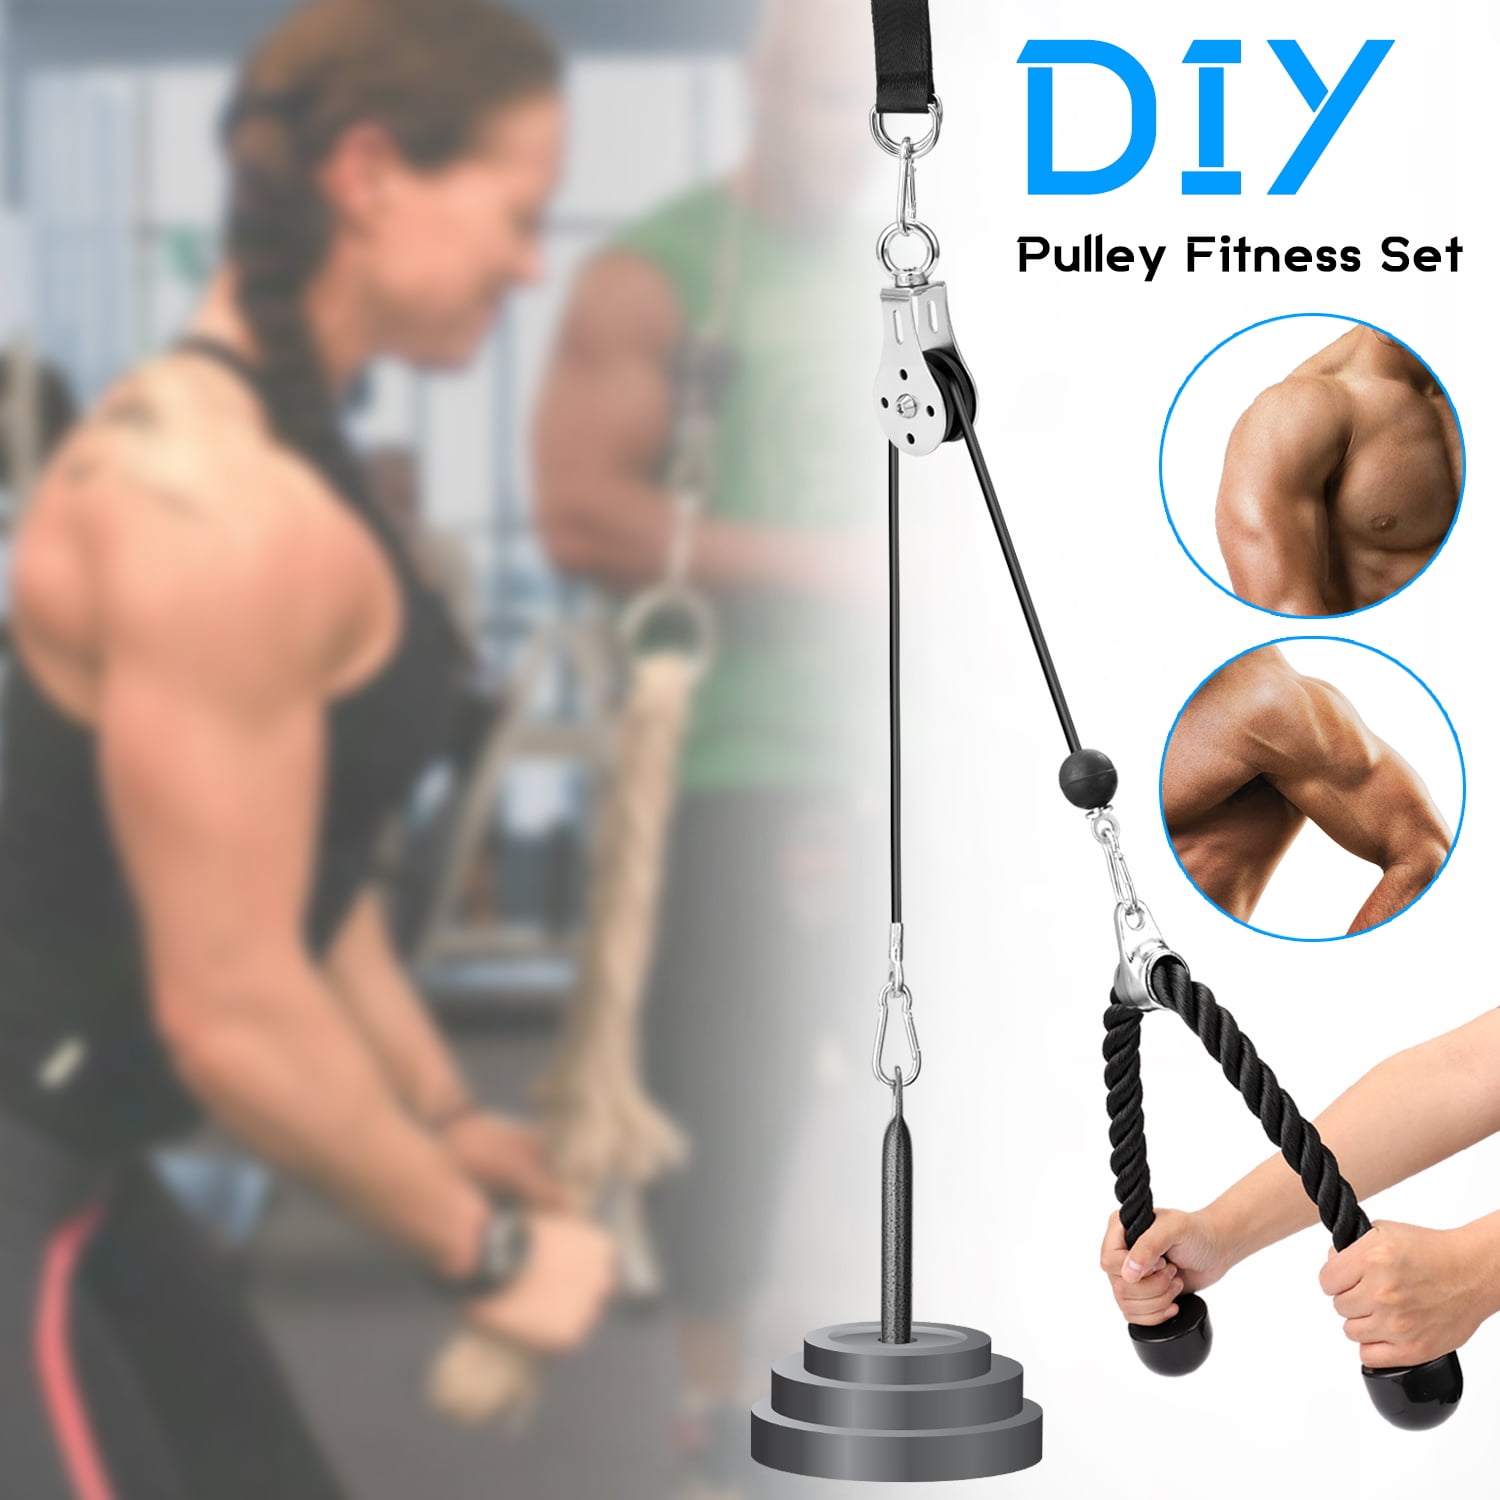 US Fitness Pulley Cable Gym DIY Workout Equipment Machine Attachment System Home